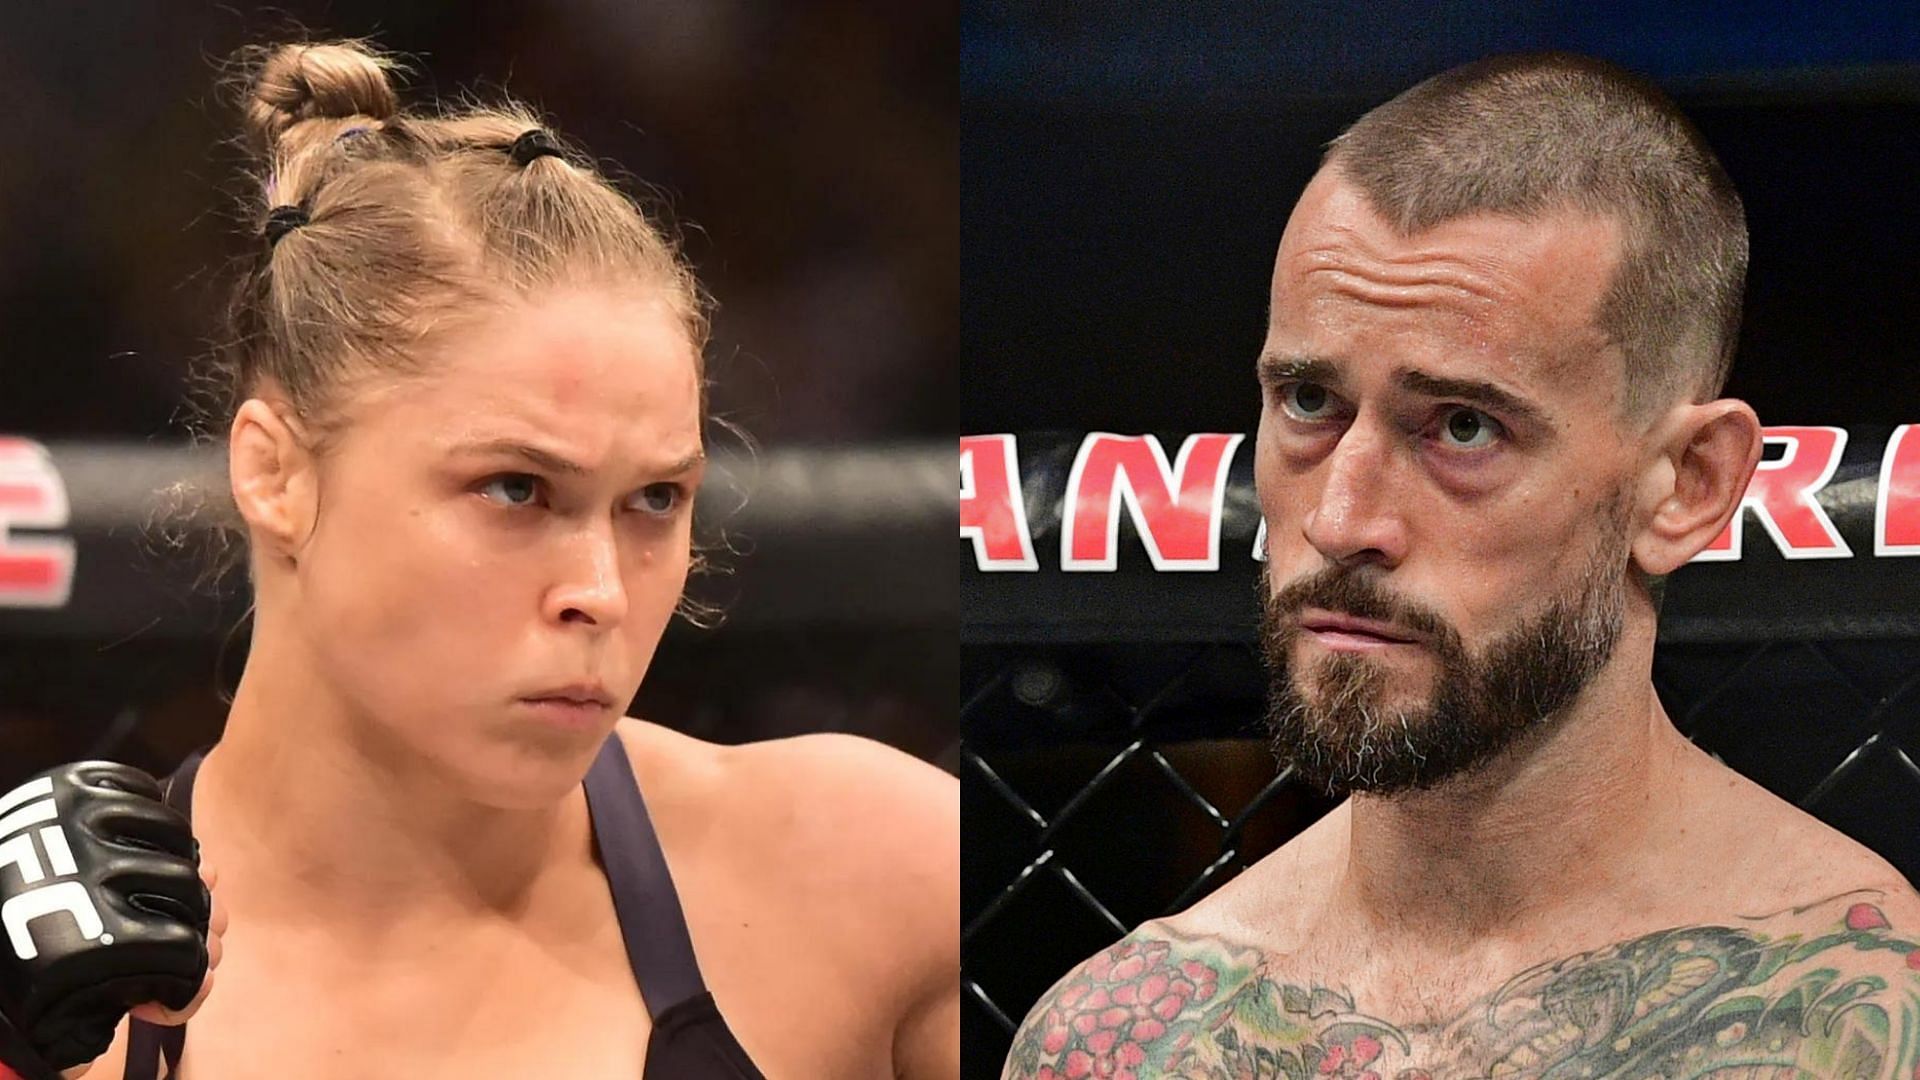 Who would win in a fight between CM Punk and Ronda Rousey?